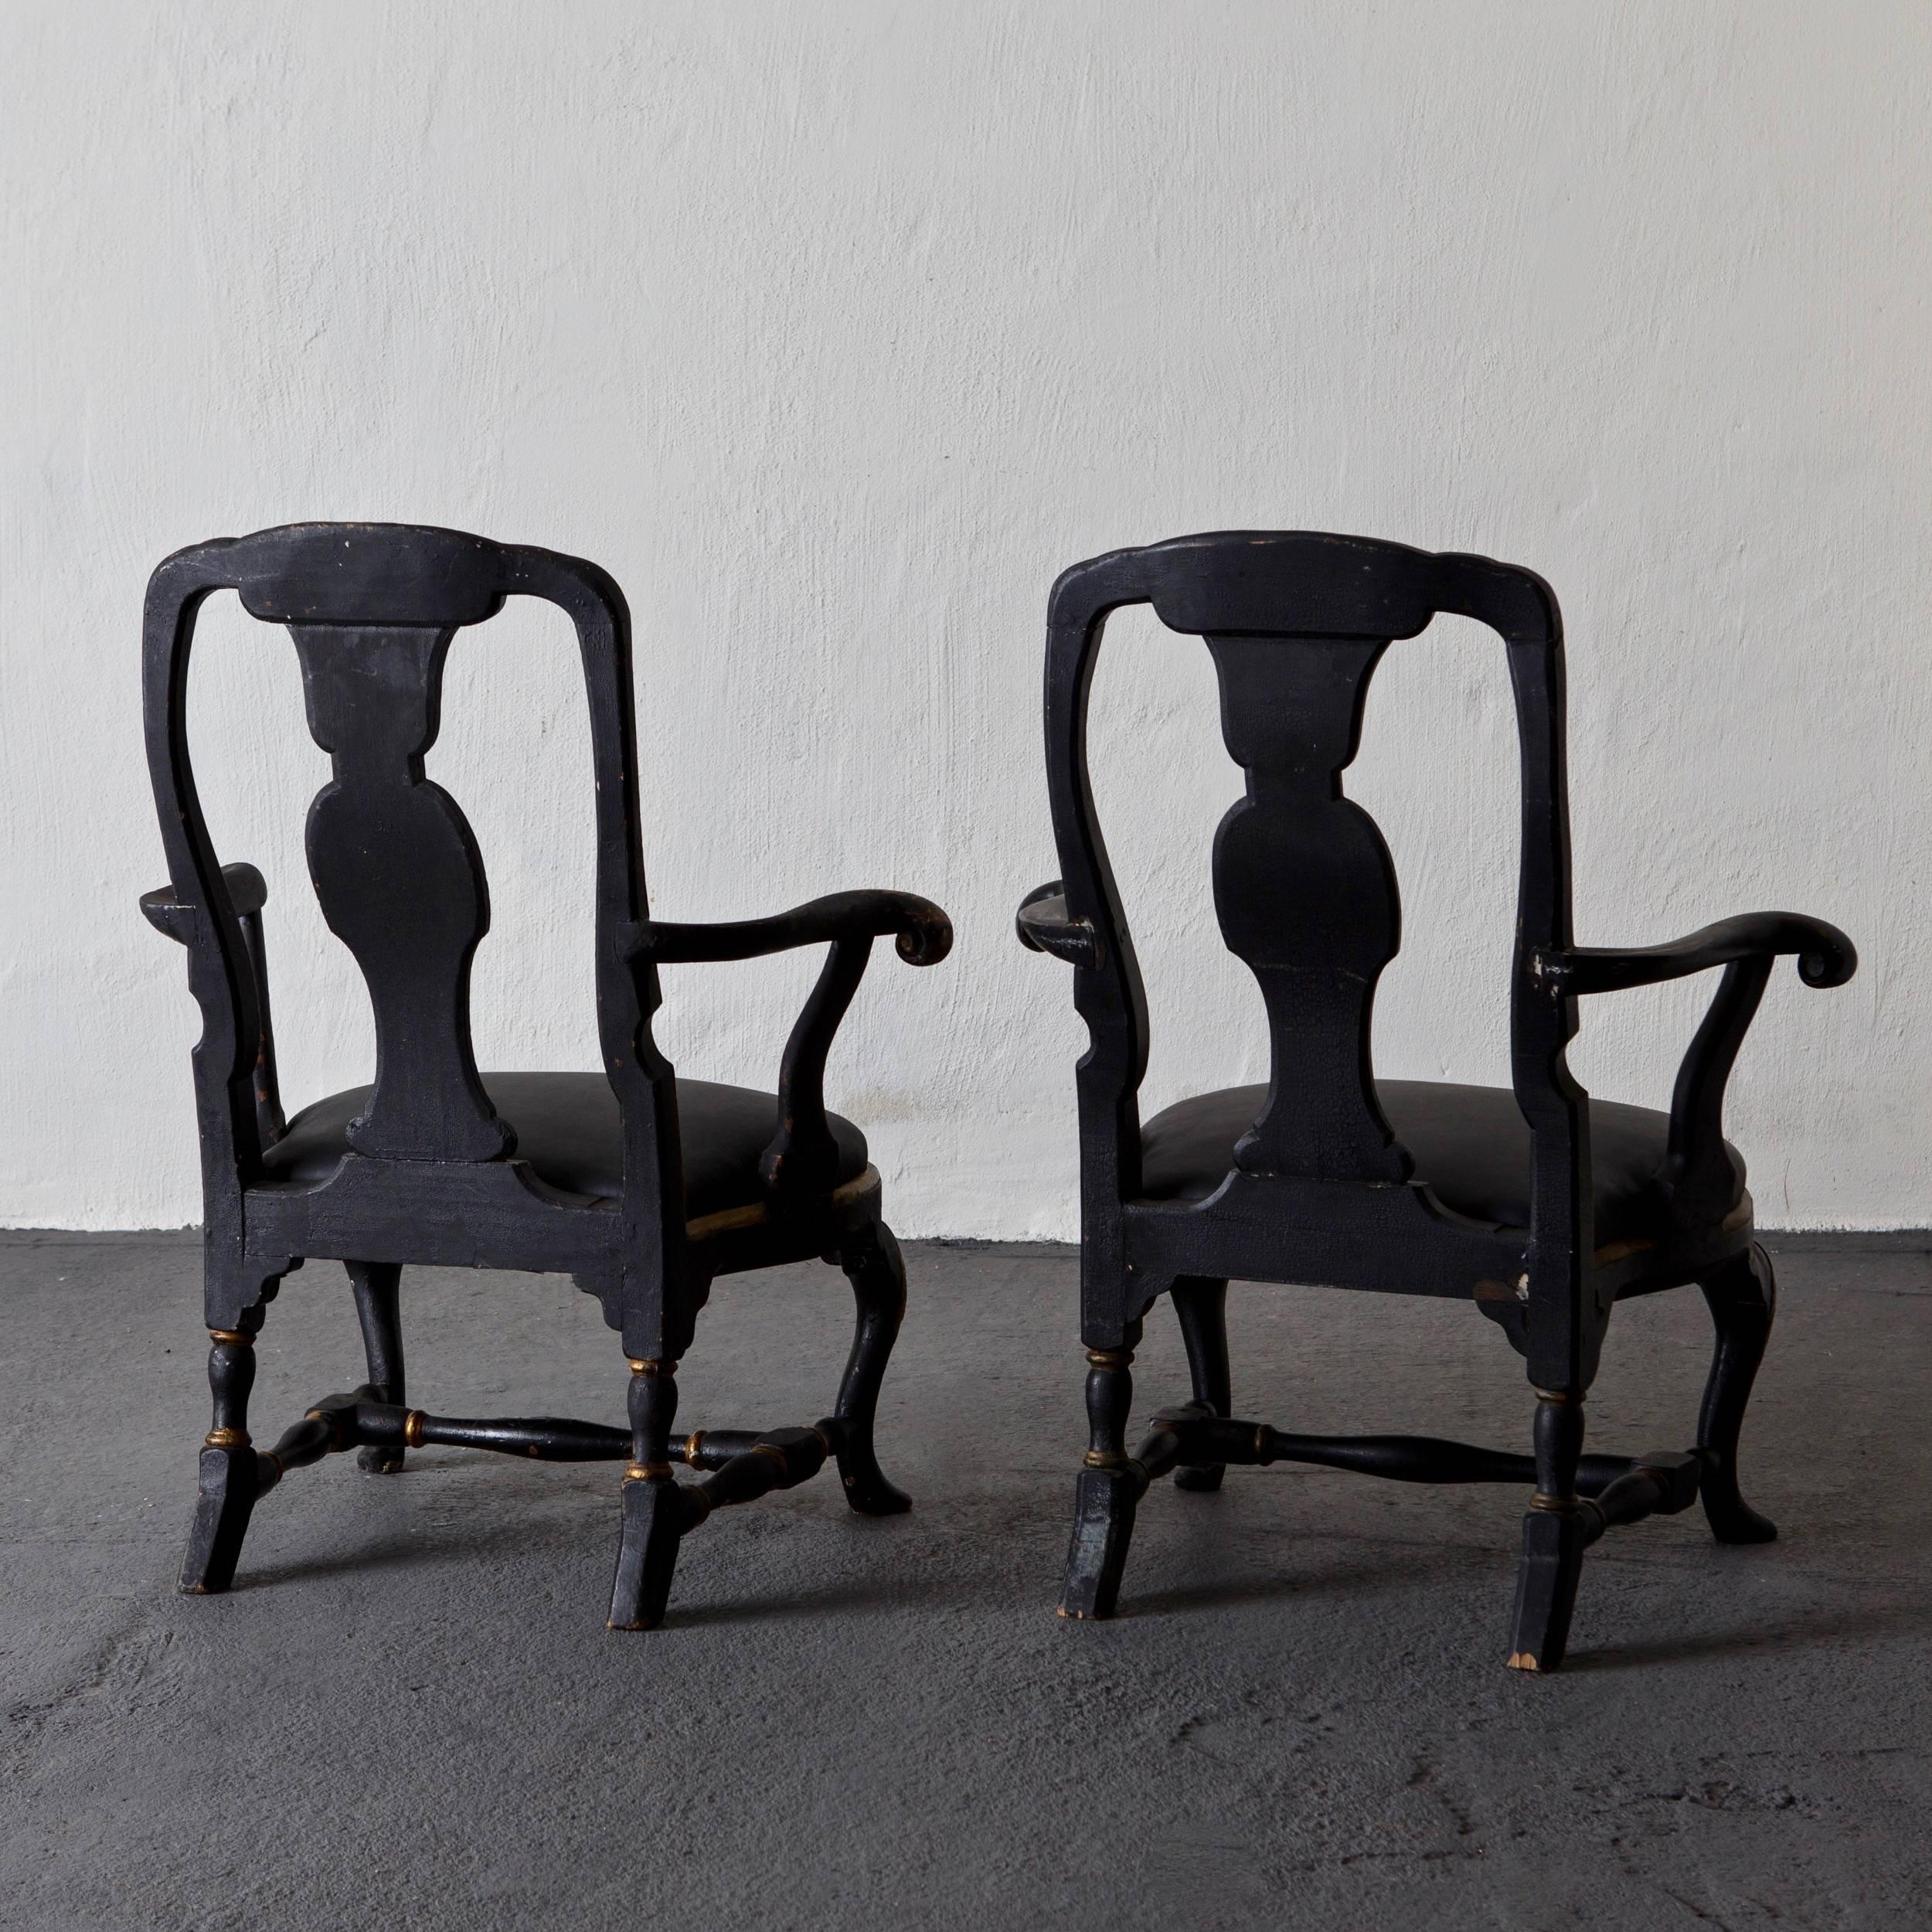 Mid-18th Century Armchairs Assembled Pair Swedish Rococo, 18th Century Period Black Sweden